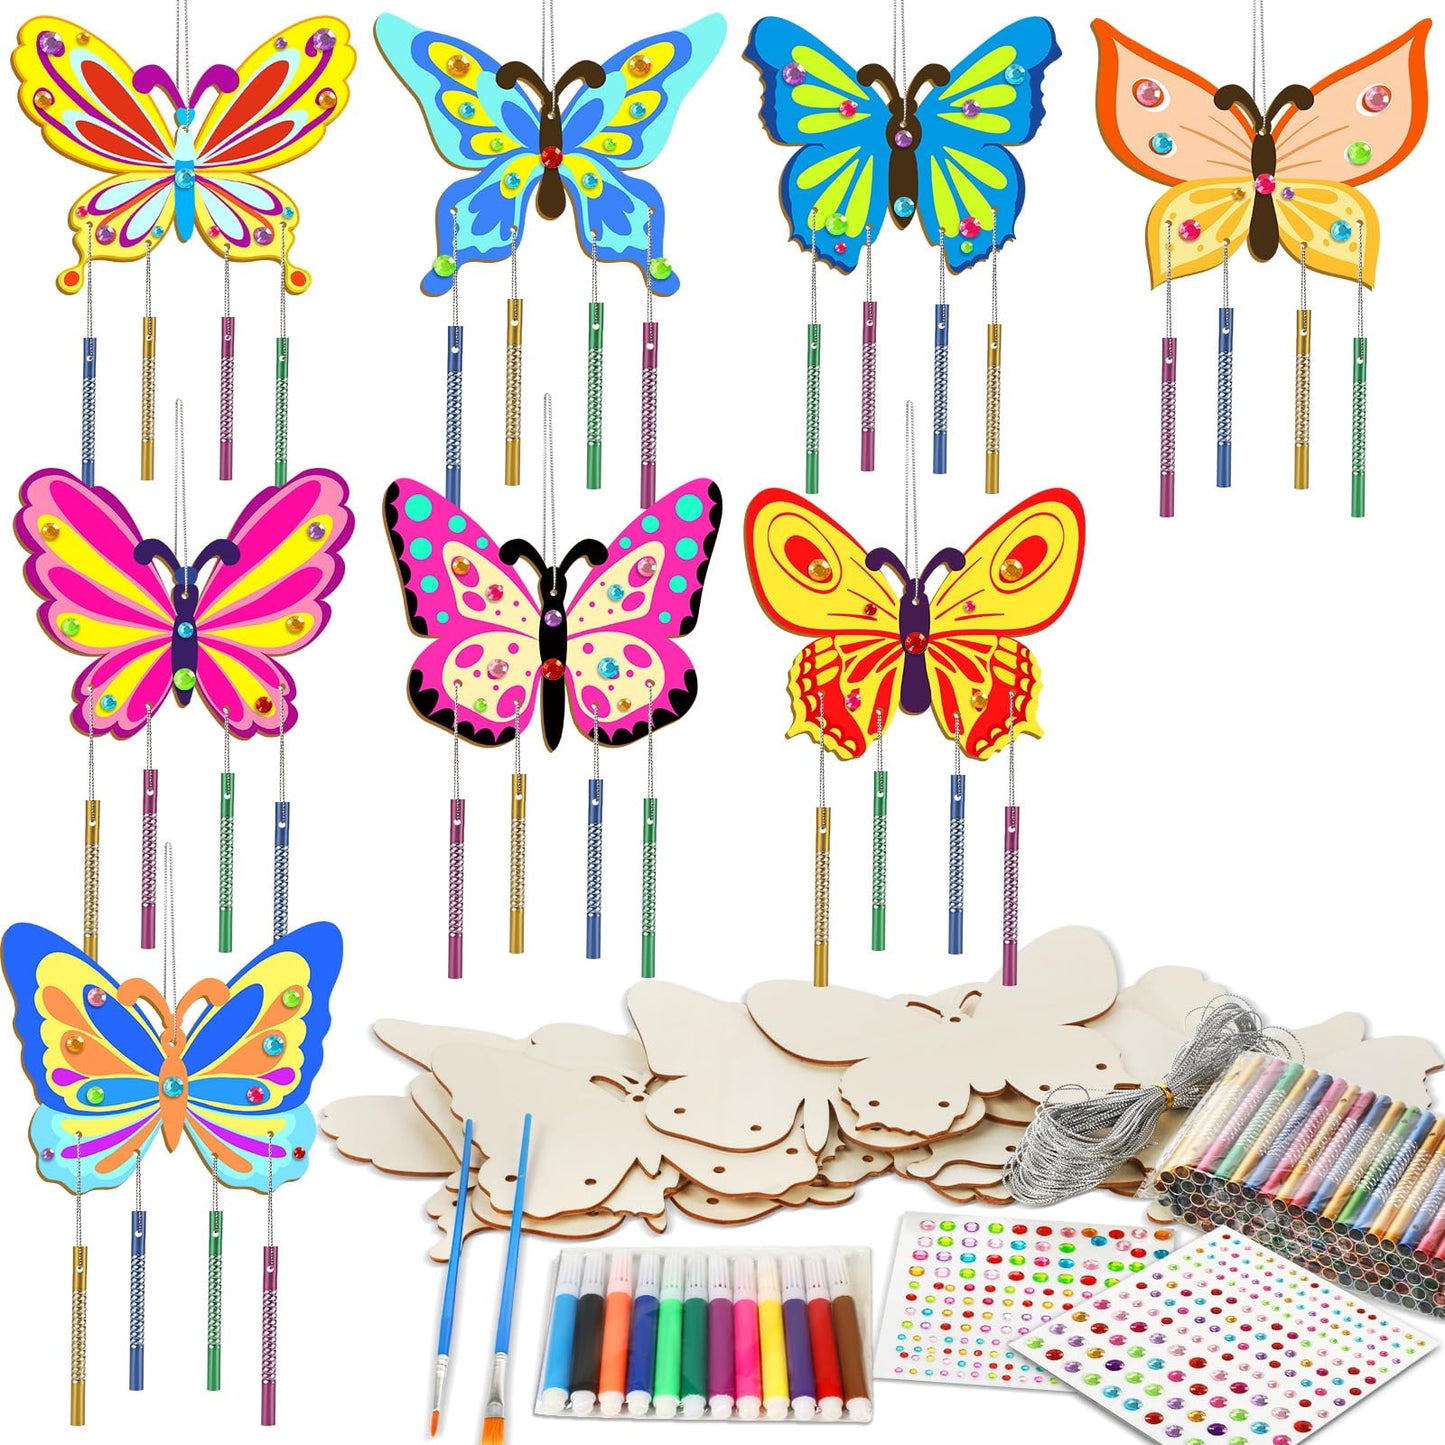 16 Pack Butterfly Wind Chime Kits Butterfly Crafts for Kids Make Your Own Butterfly Wind Chime Wooden DIY Arts and Crafts for Summer Party School